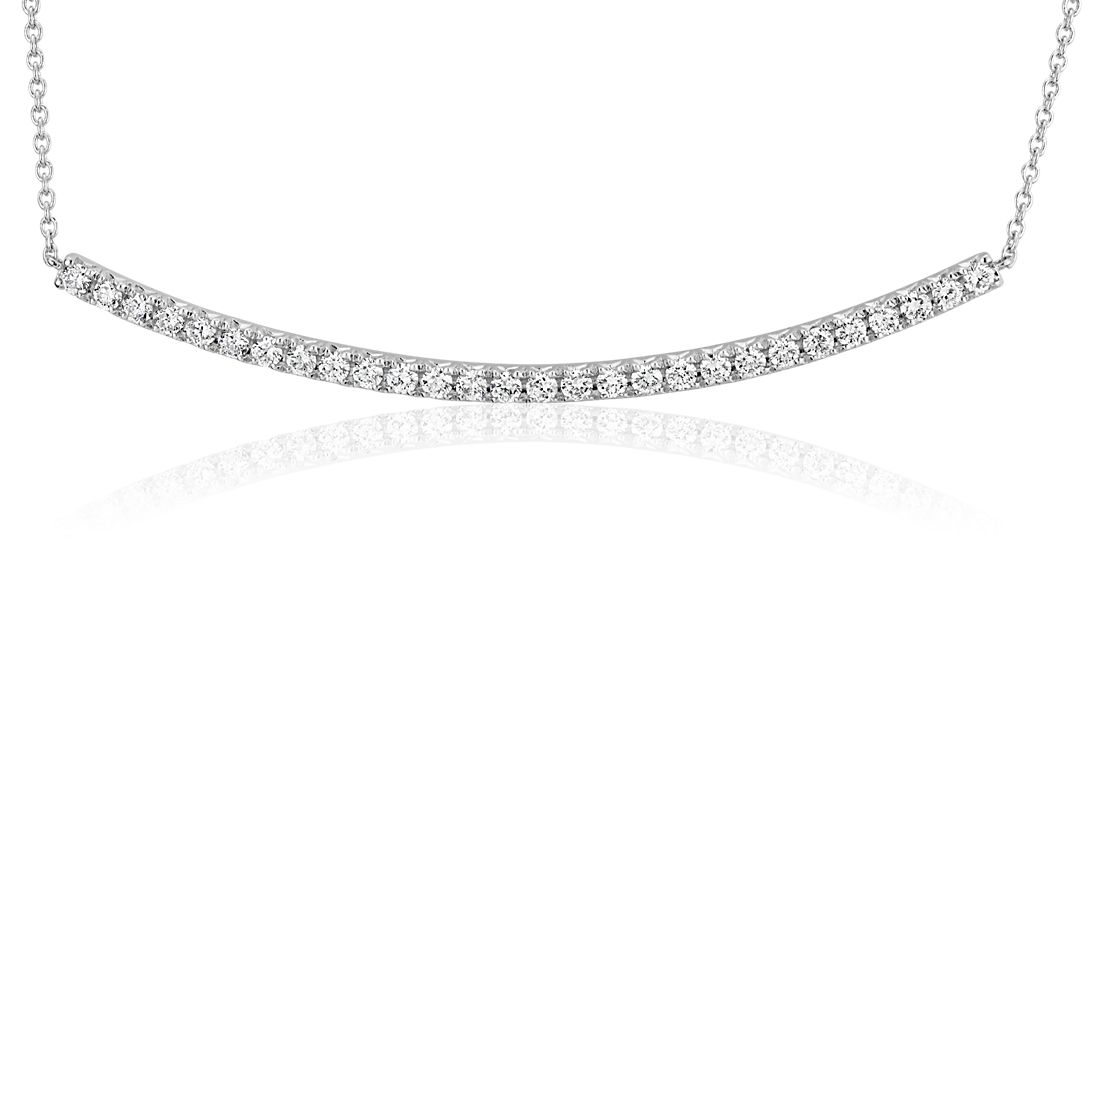 Diamond Delicate Curved Bar Necklace in 14k White Gold (3/8 ct. tw.)